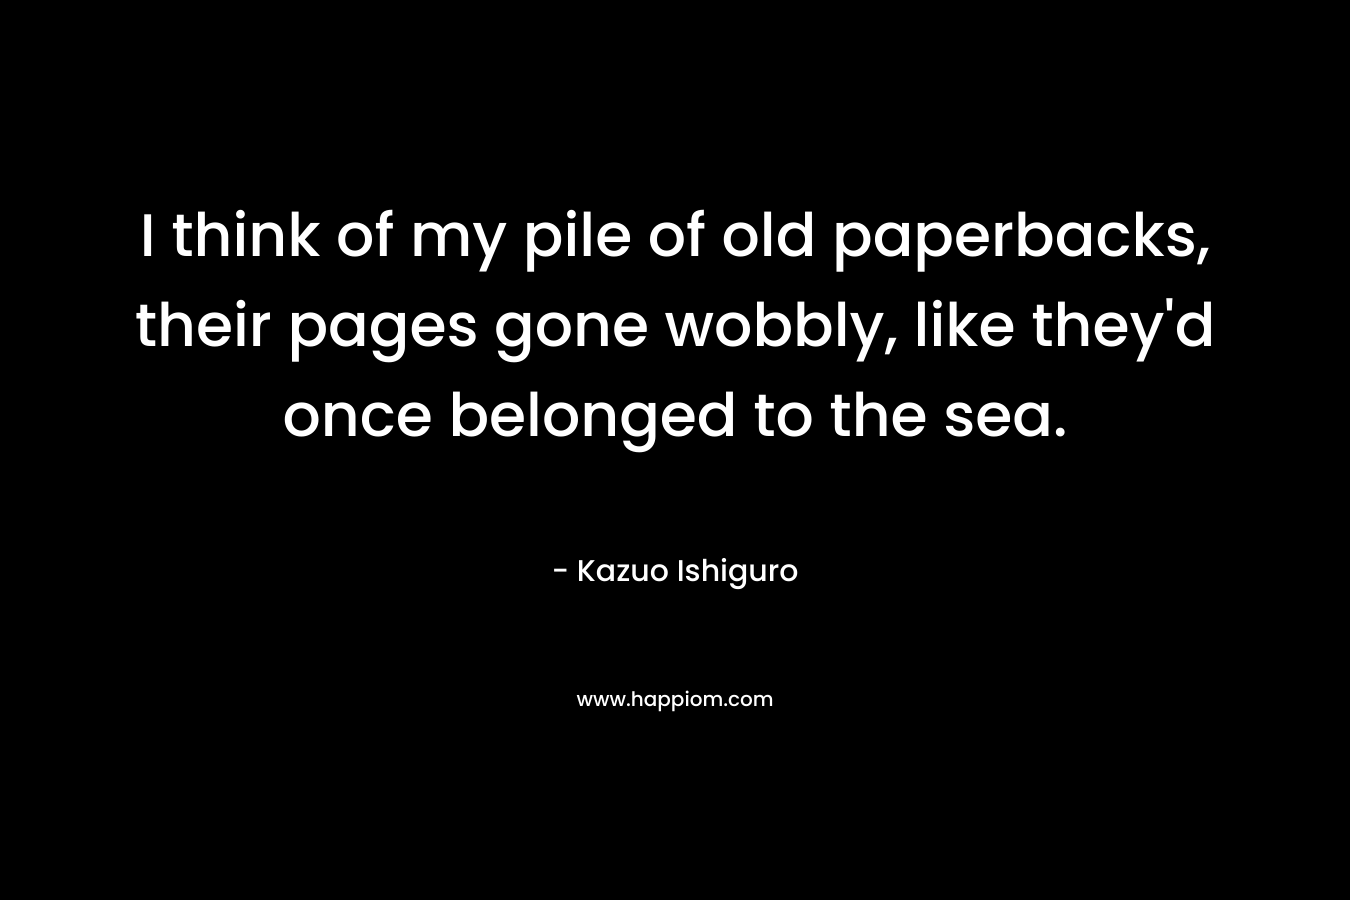 I think of my pile of old paperbacks, their pages gone wobbly, like they'd once belonged to the sea.